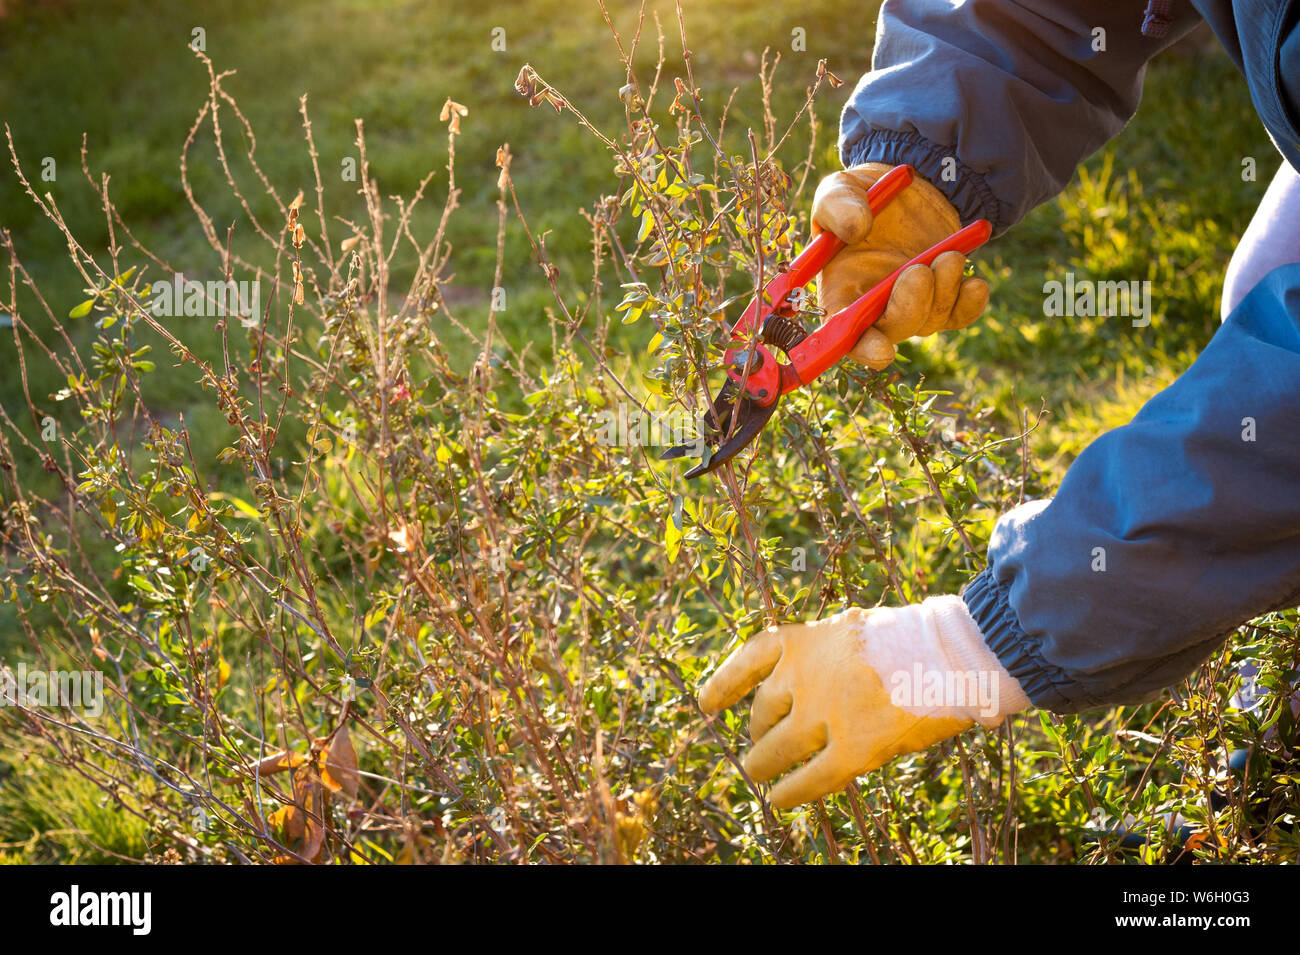 Pruning the plant in the garden. Stock Photo